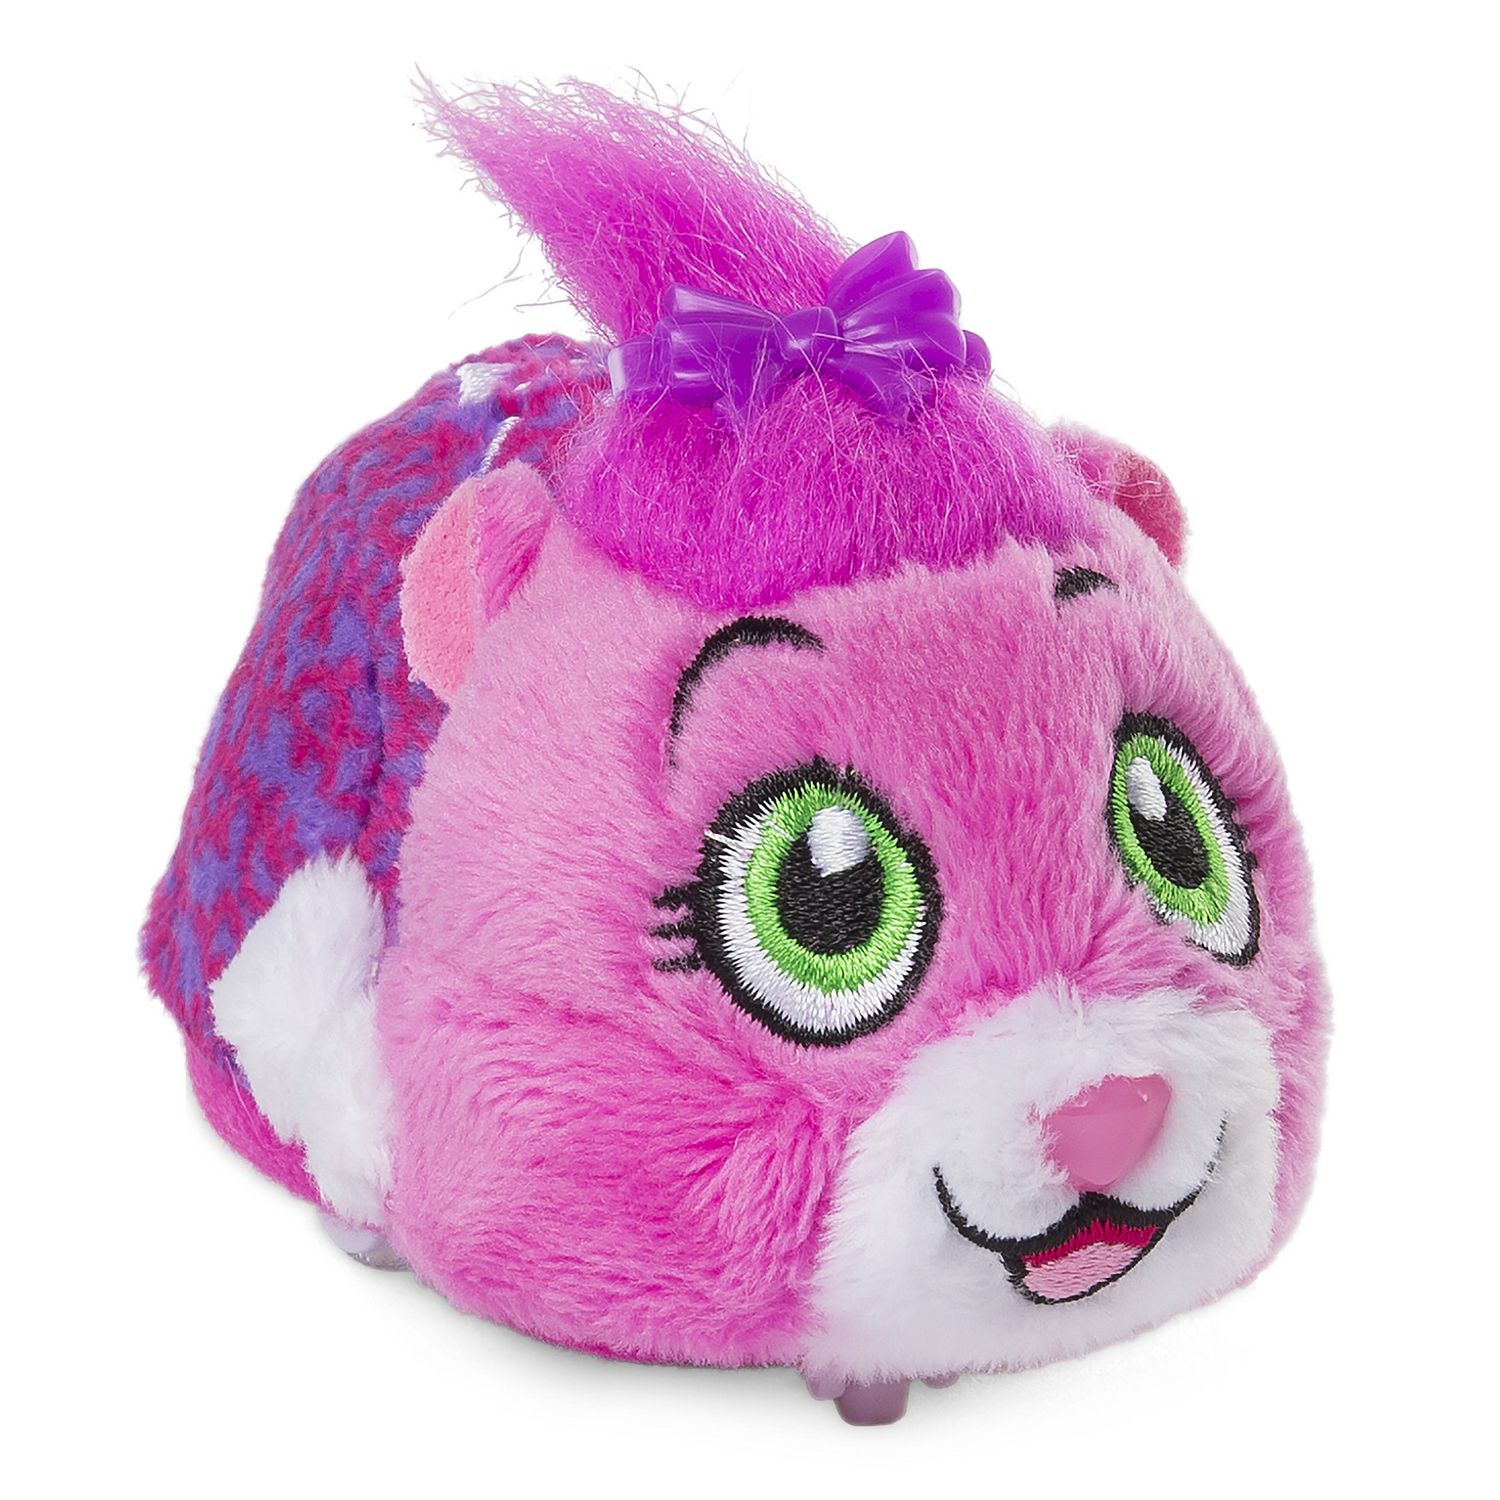 Pajama Party Sophie 4” Hamster Toy with Sound and Movement Zhu Zhu Pets 